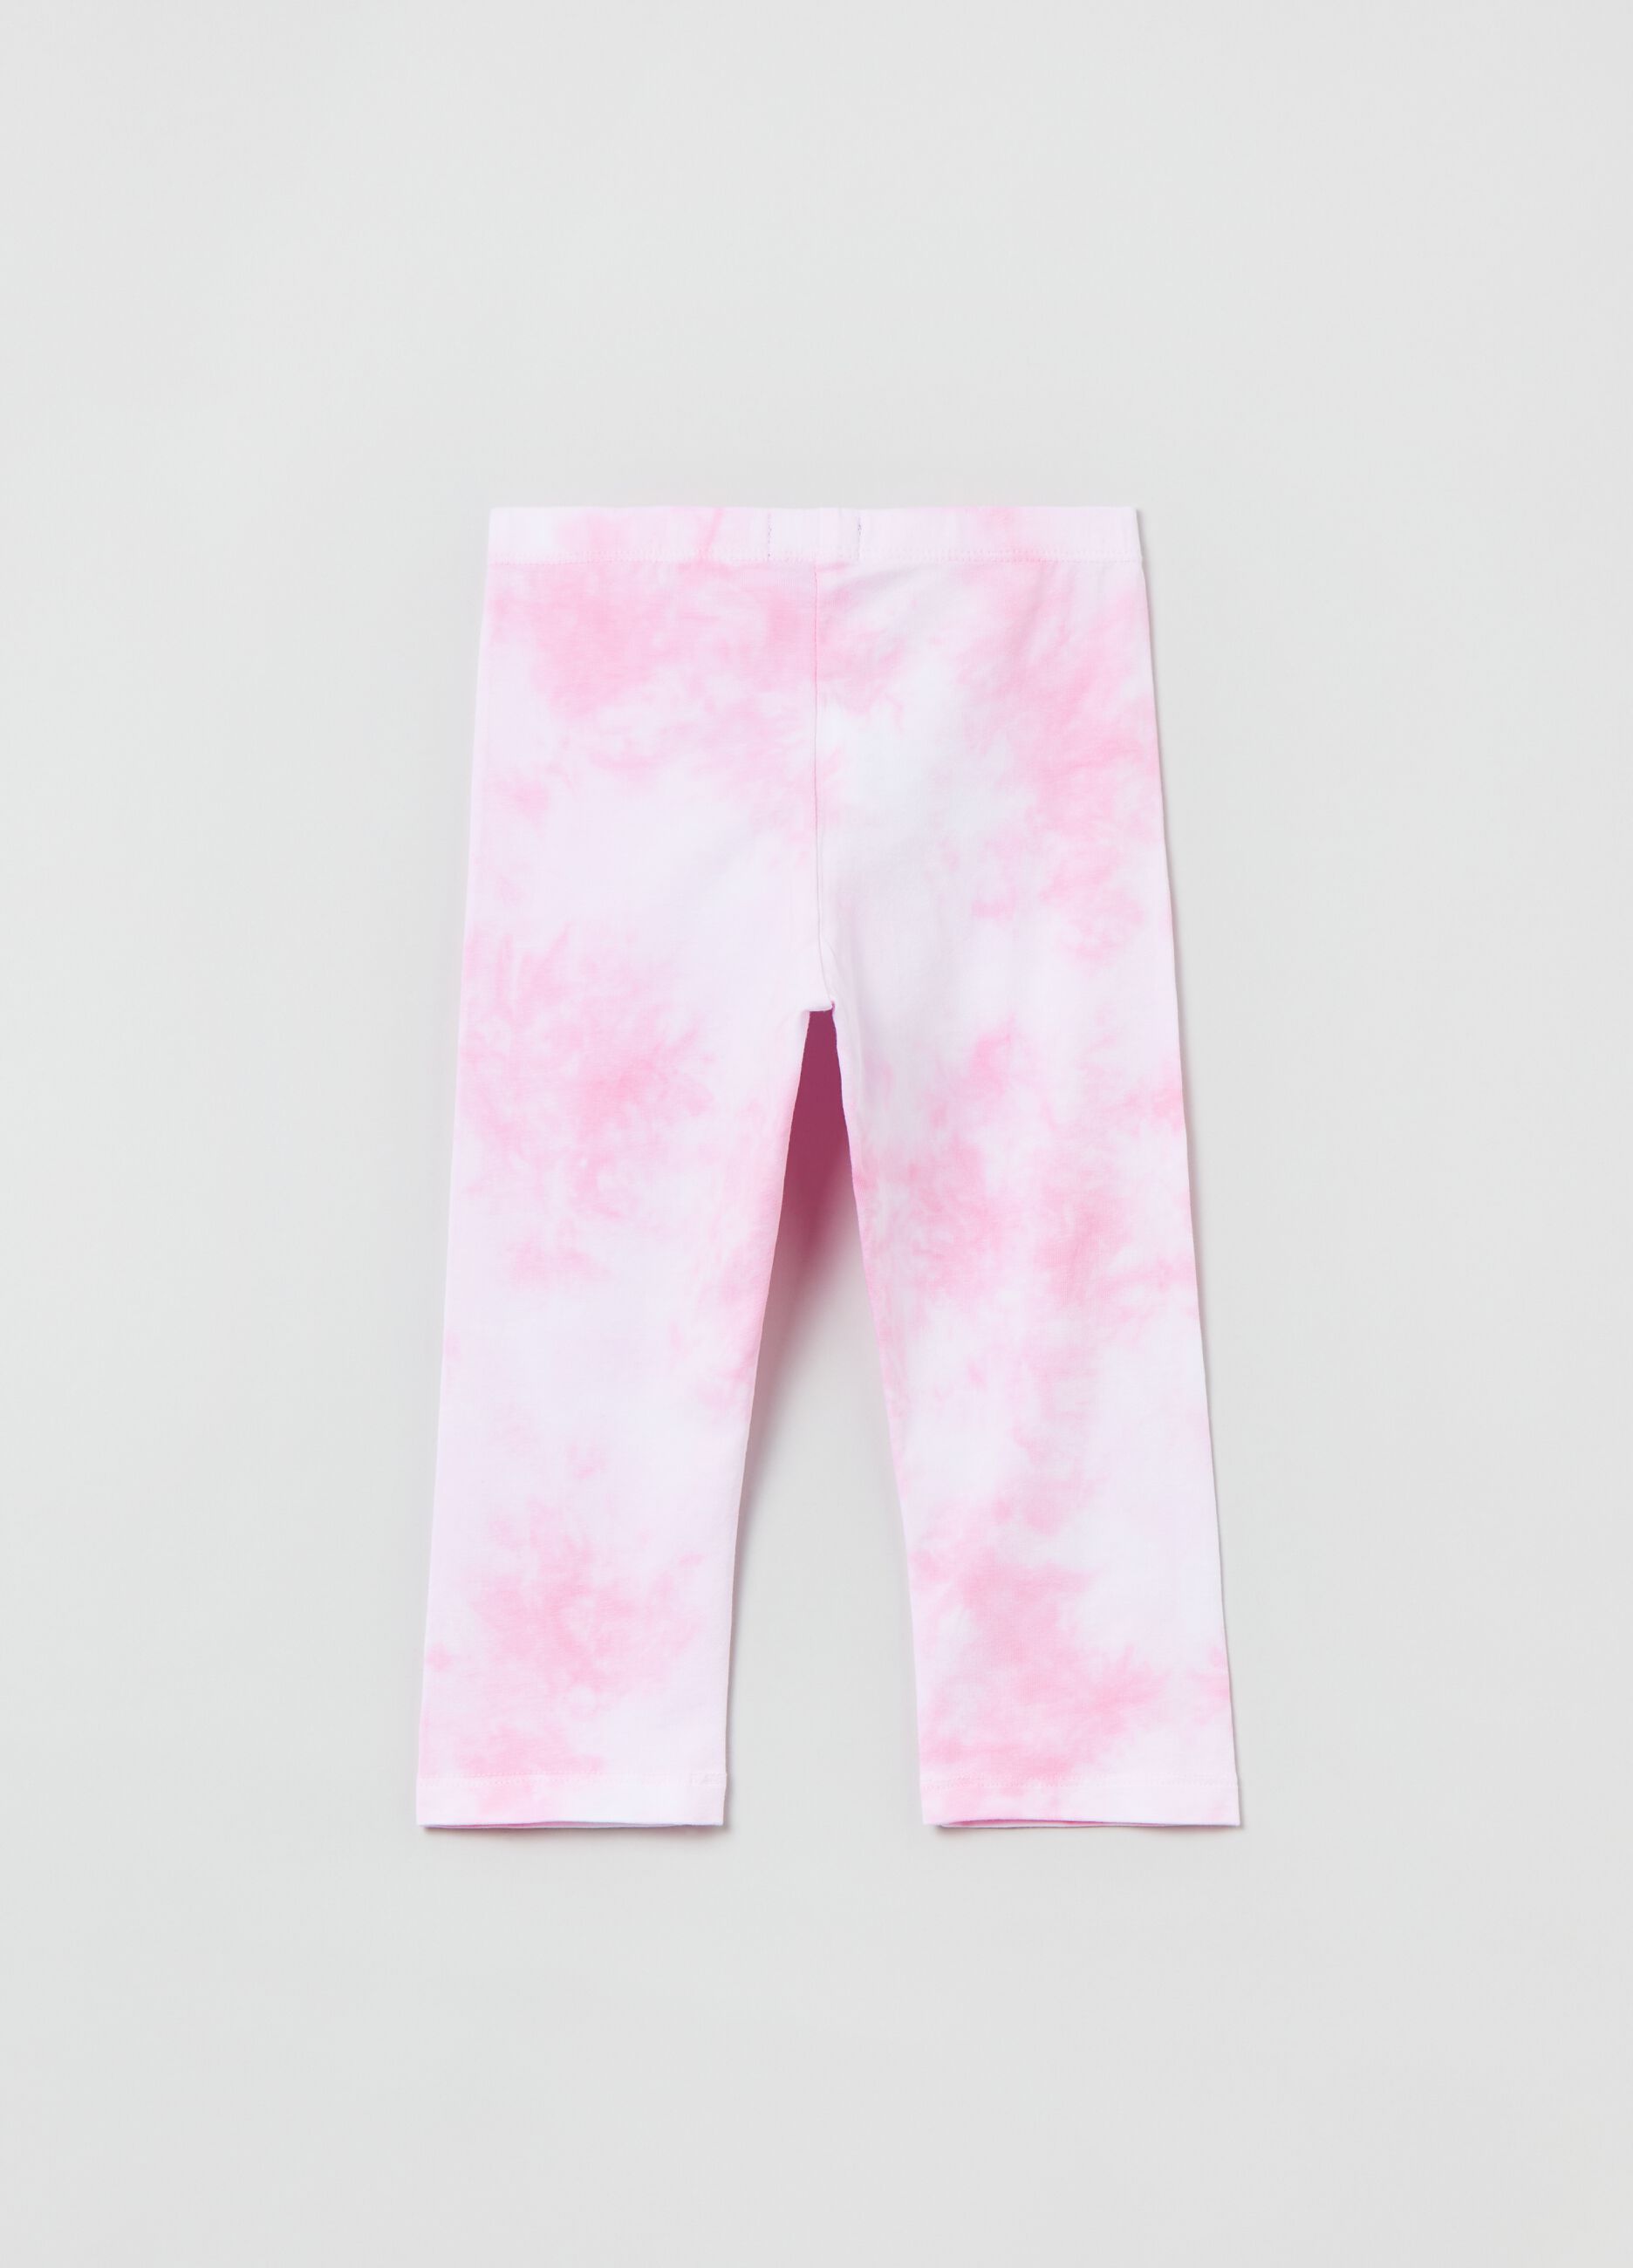 Leggings in stretch cotton with tie dye pattern